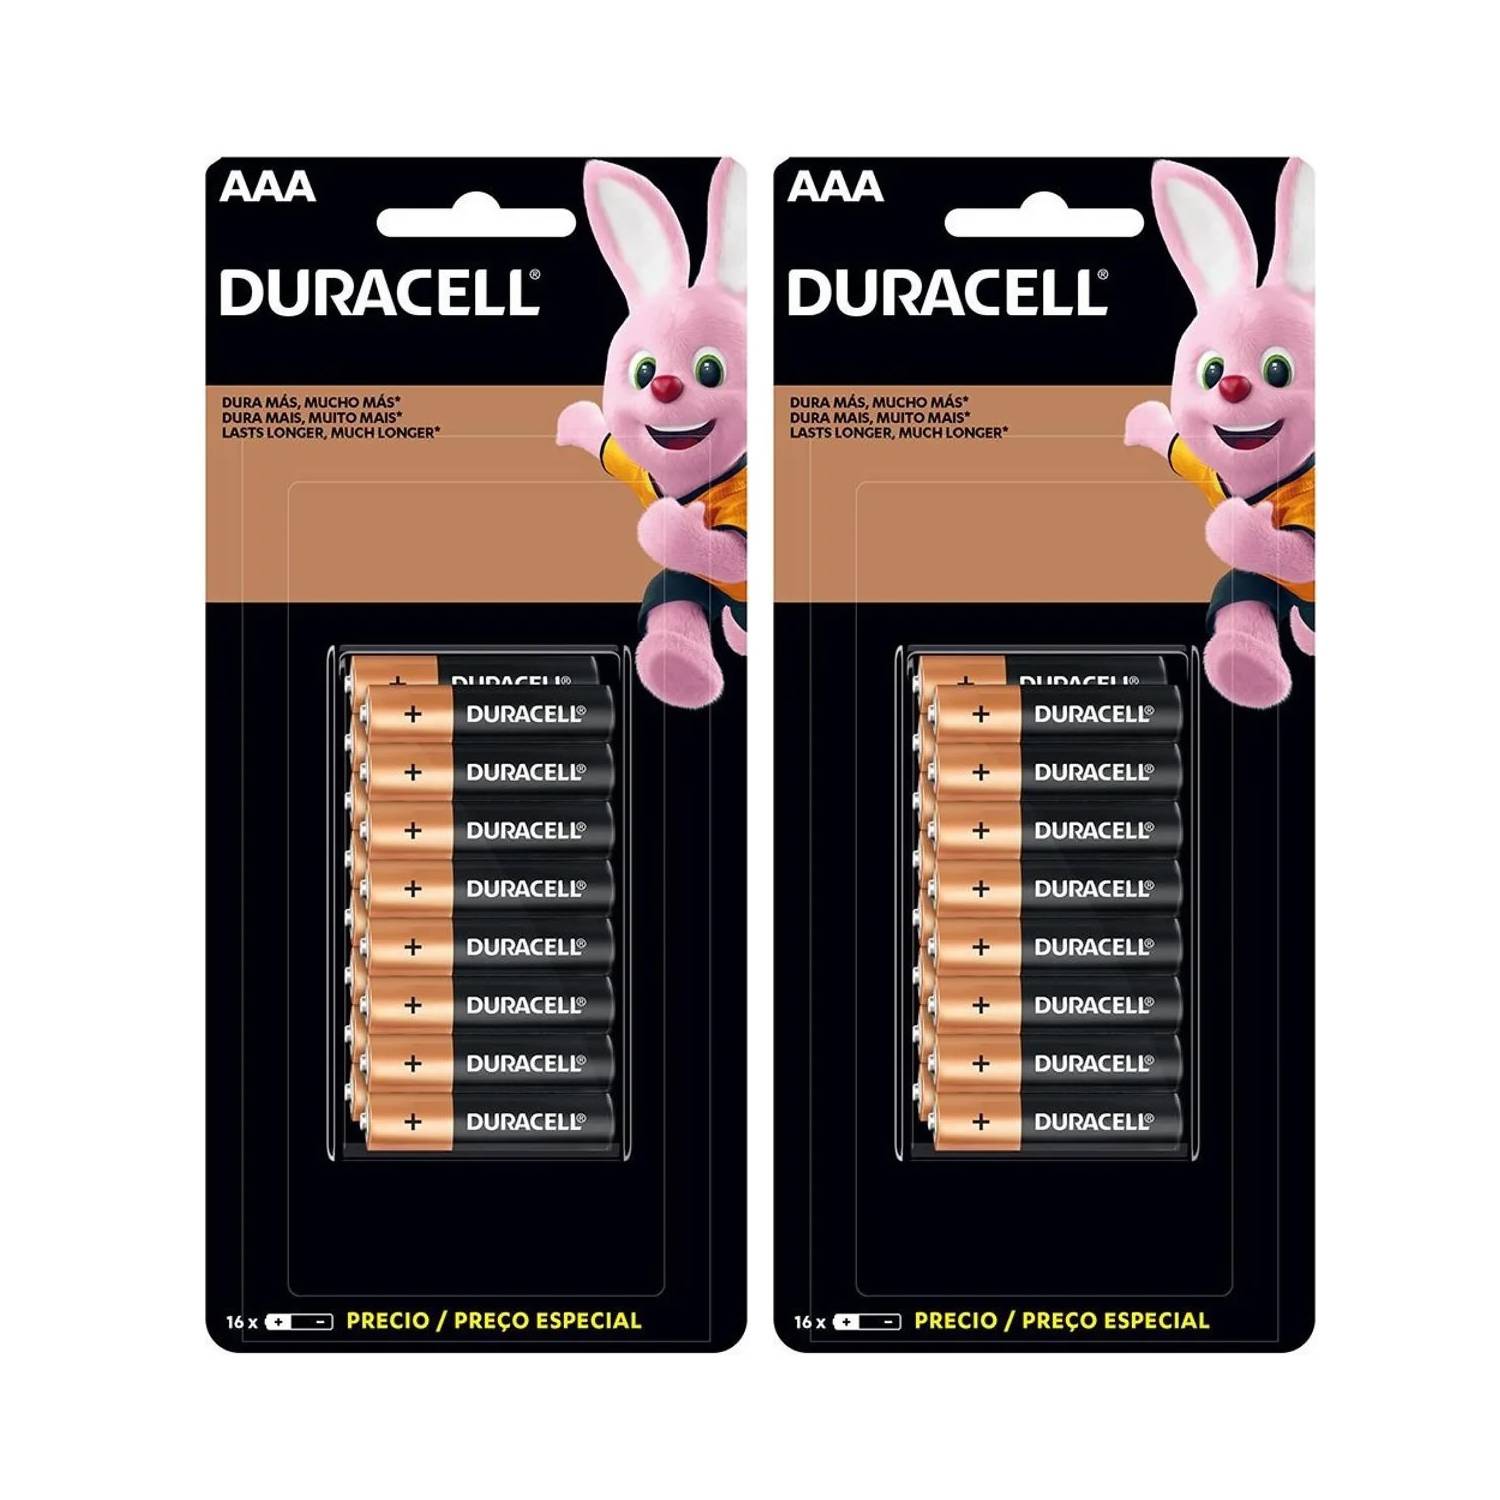 DURACELL Pack 32 Pilas Duracell Aaa Alcalina Blister 32 Unidades